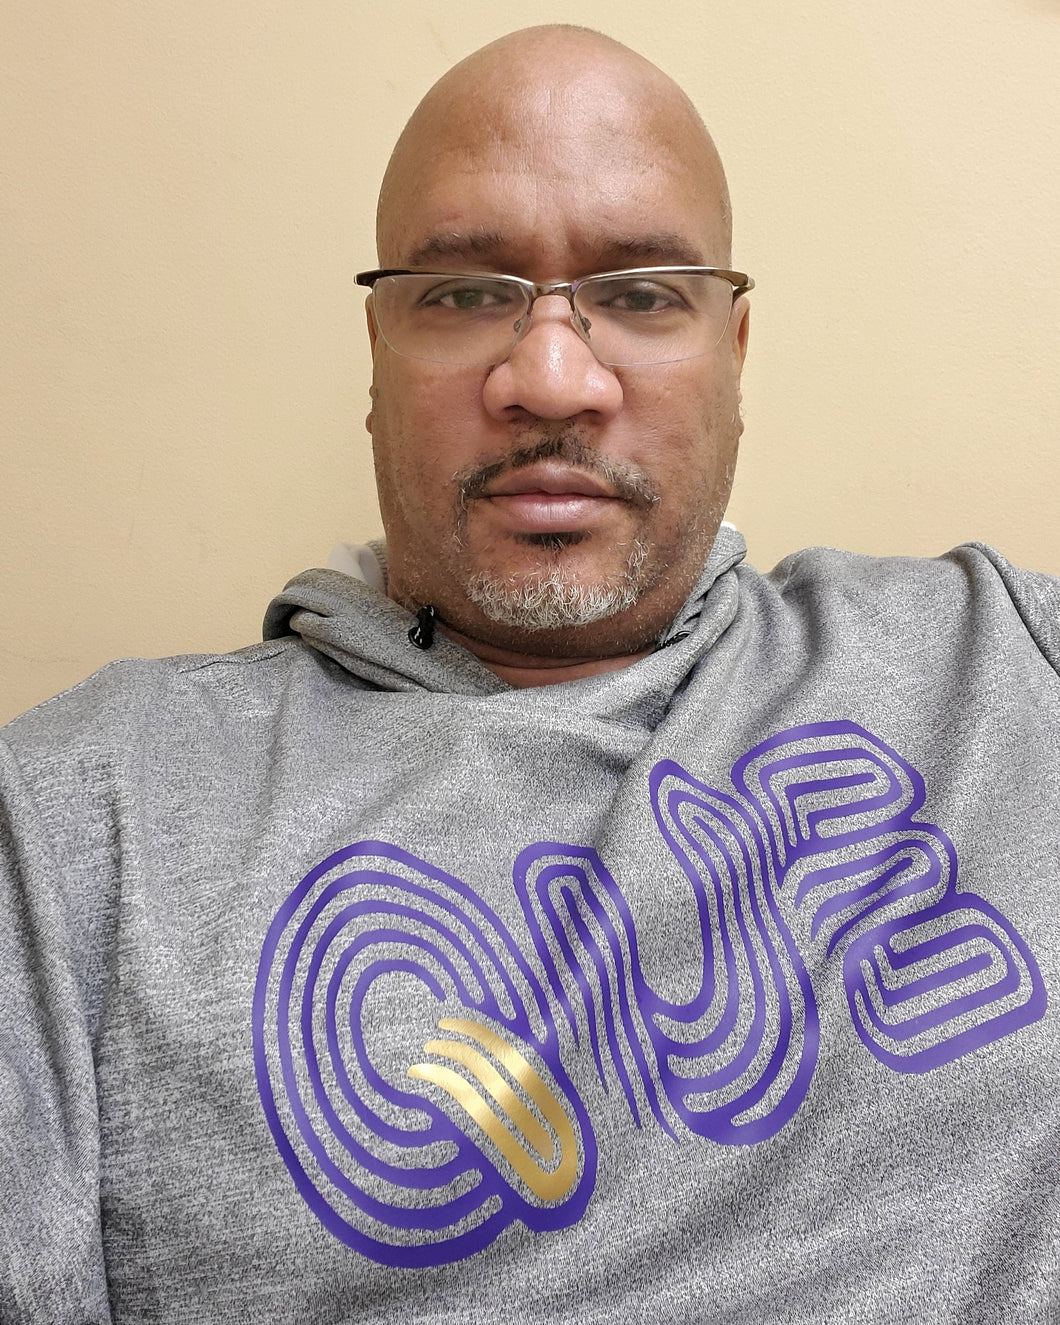 Gray QUE HOODIE  - Omega Psi Phi